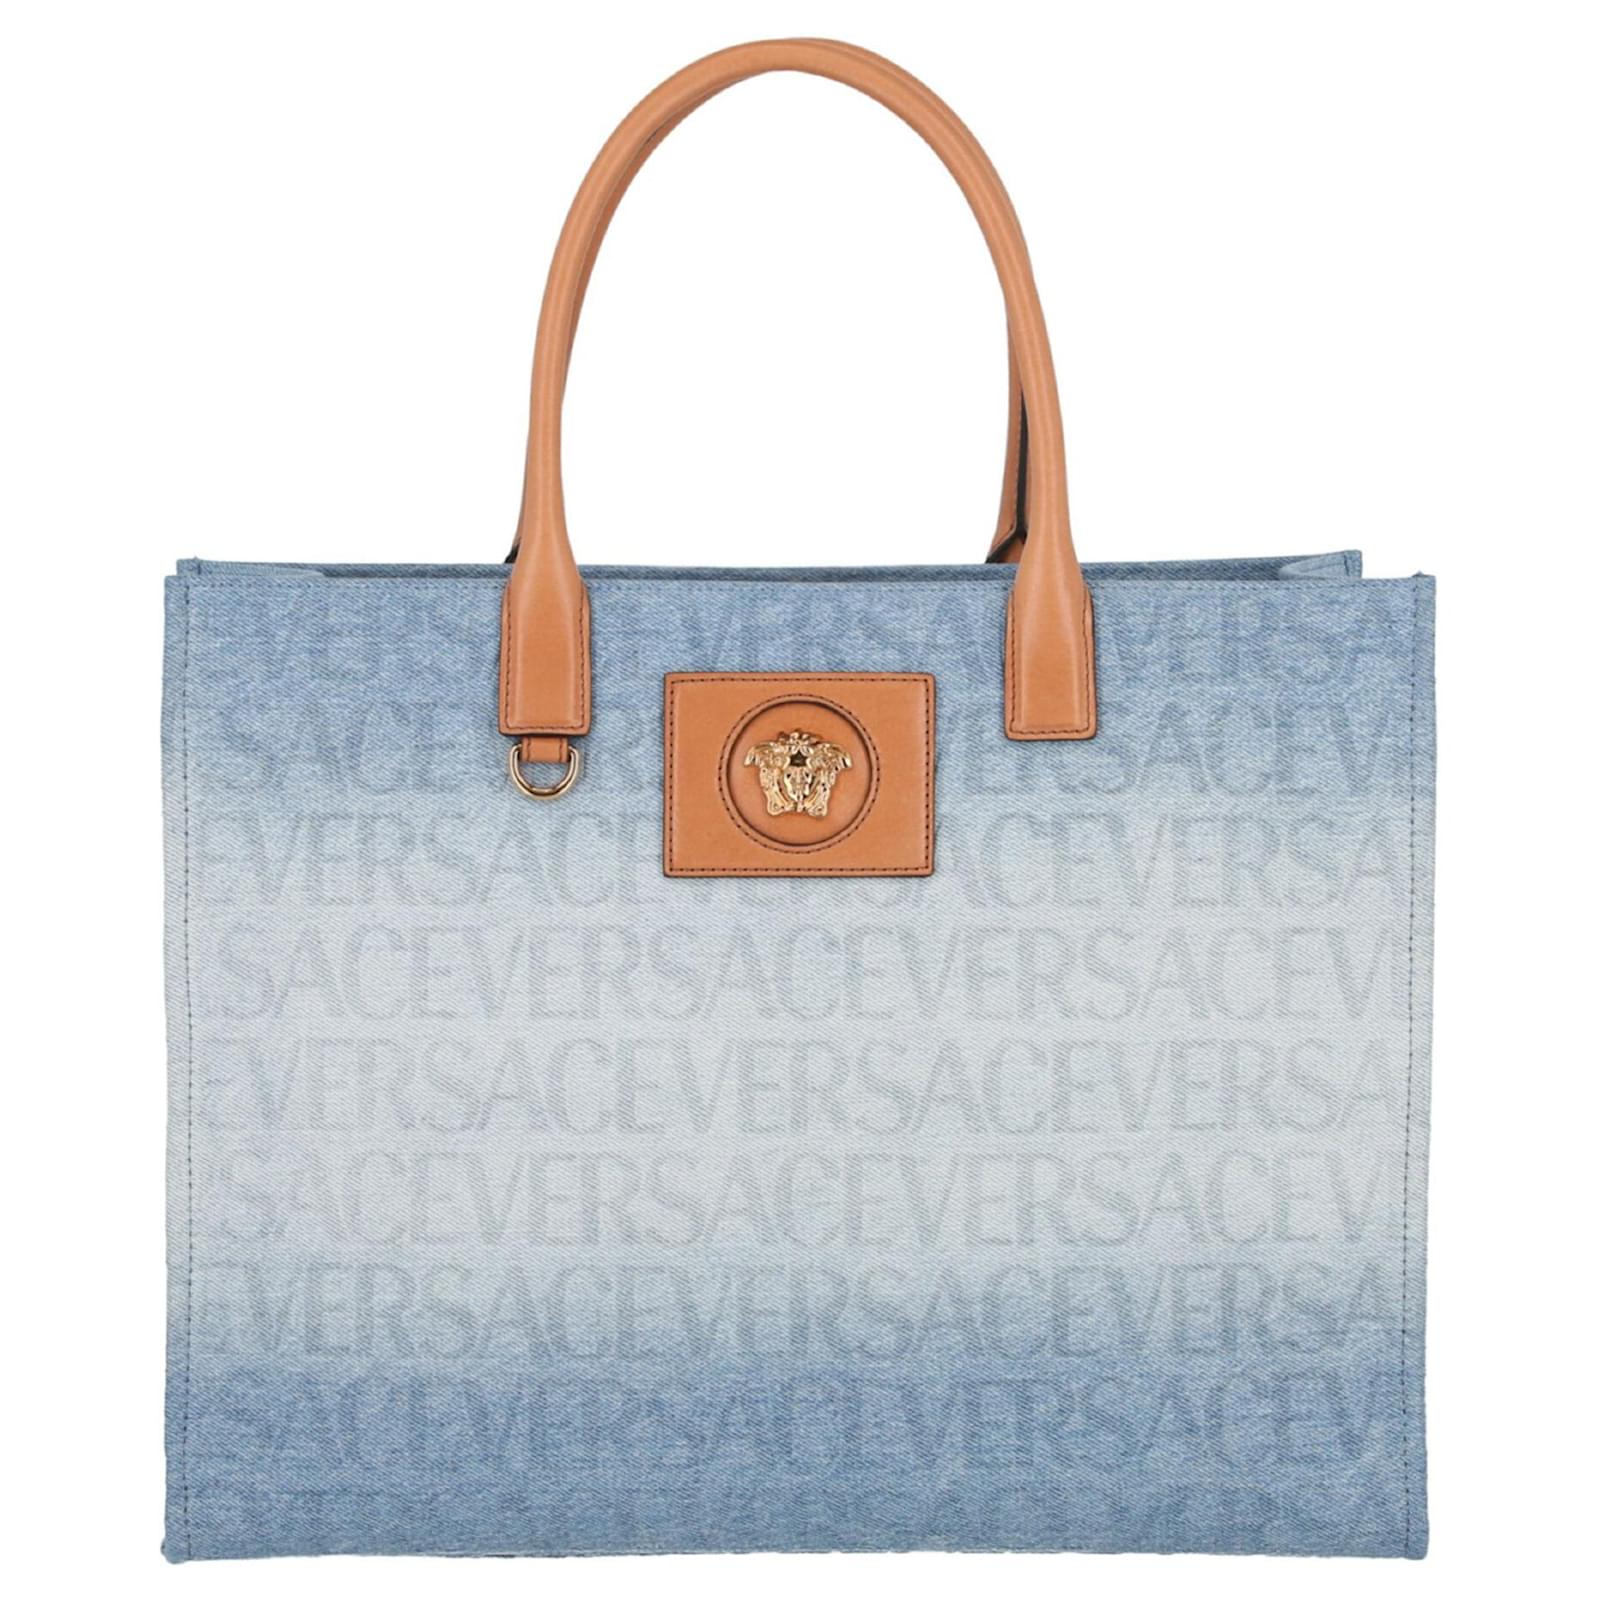 Versace Versace Allover Large Tote Bag for Women